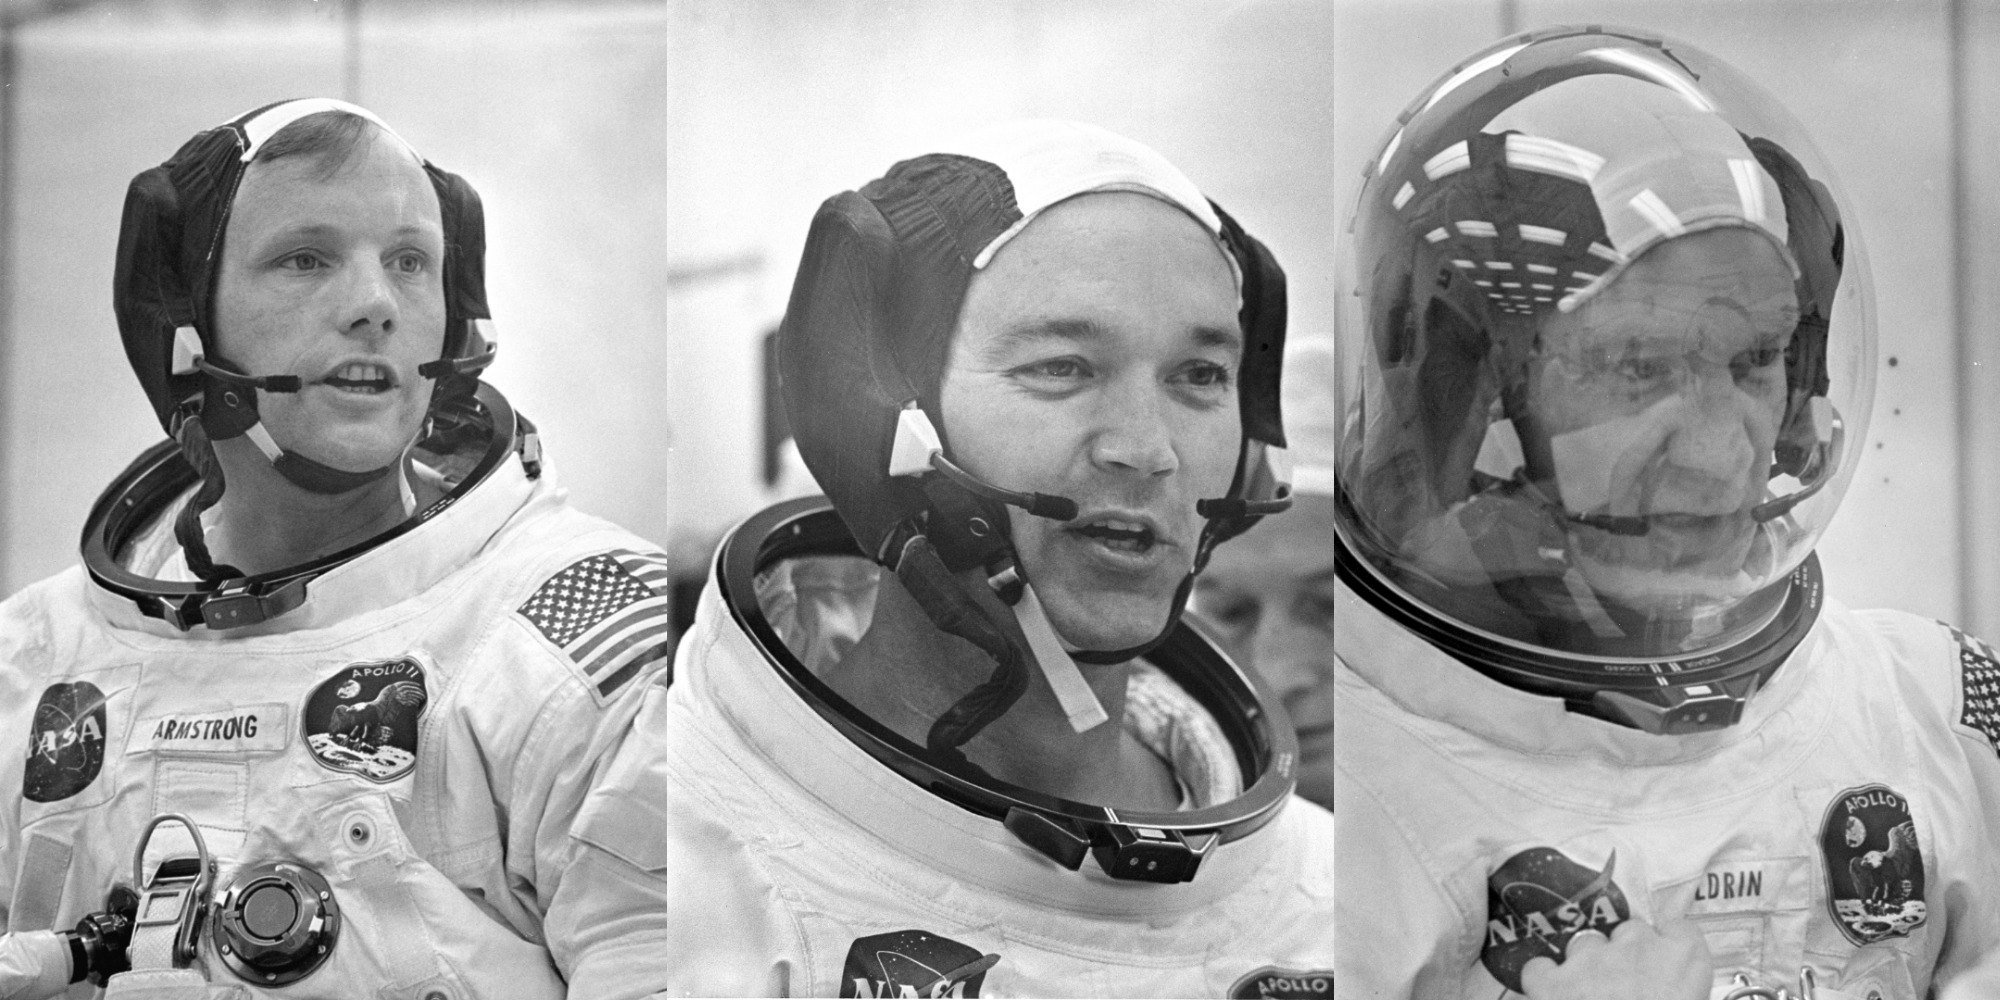 Apollo 11 astronauts complete final check of their communication systems